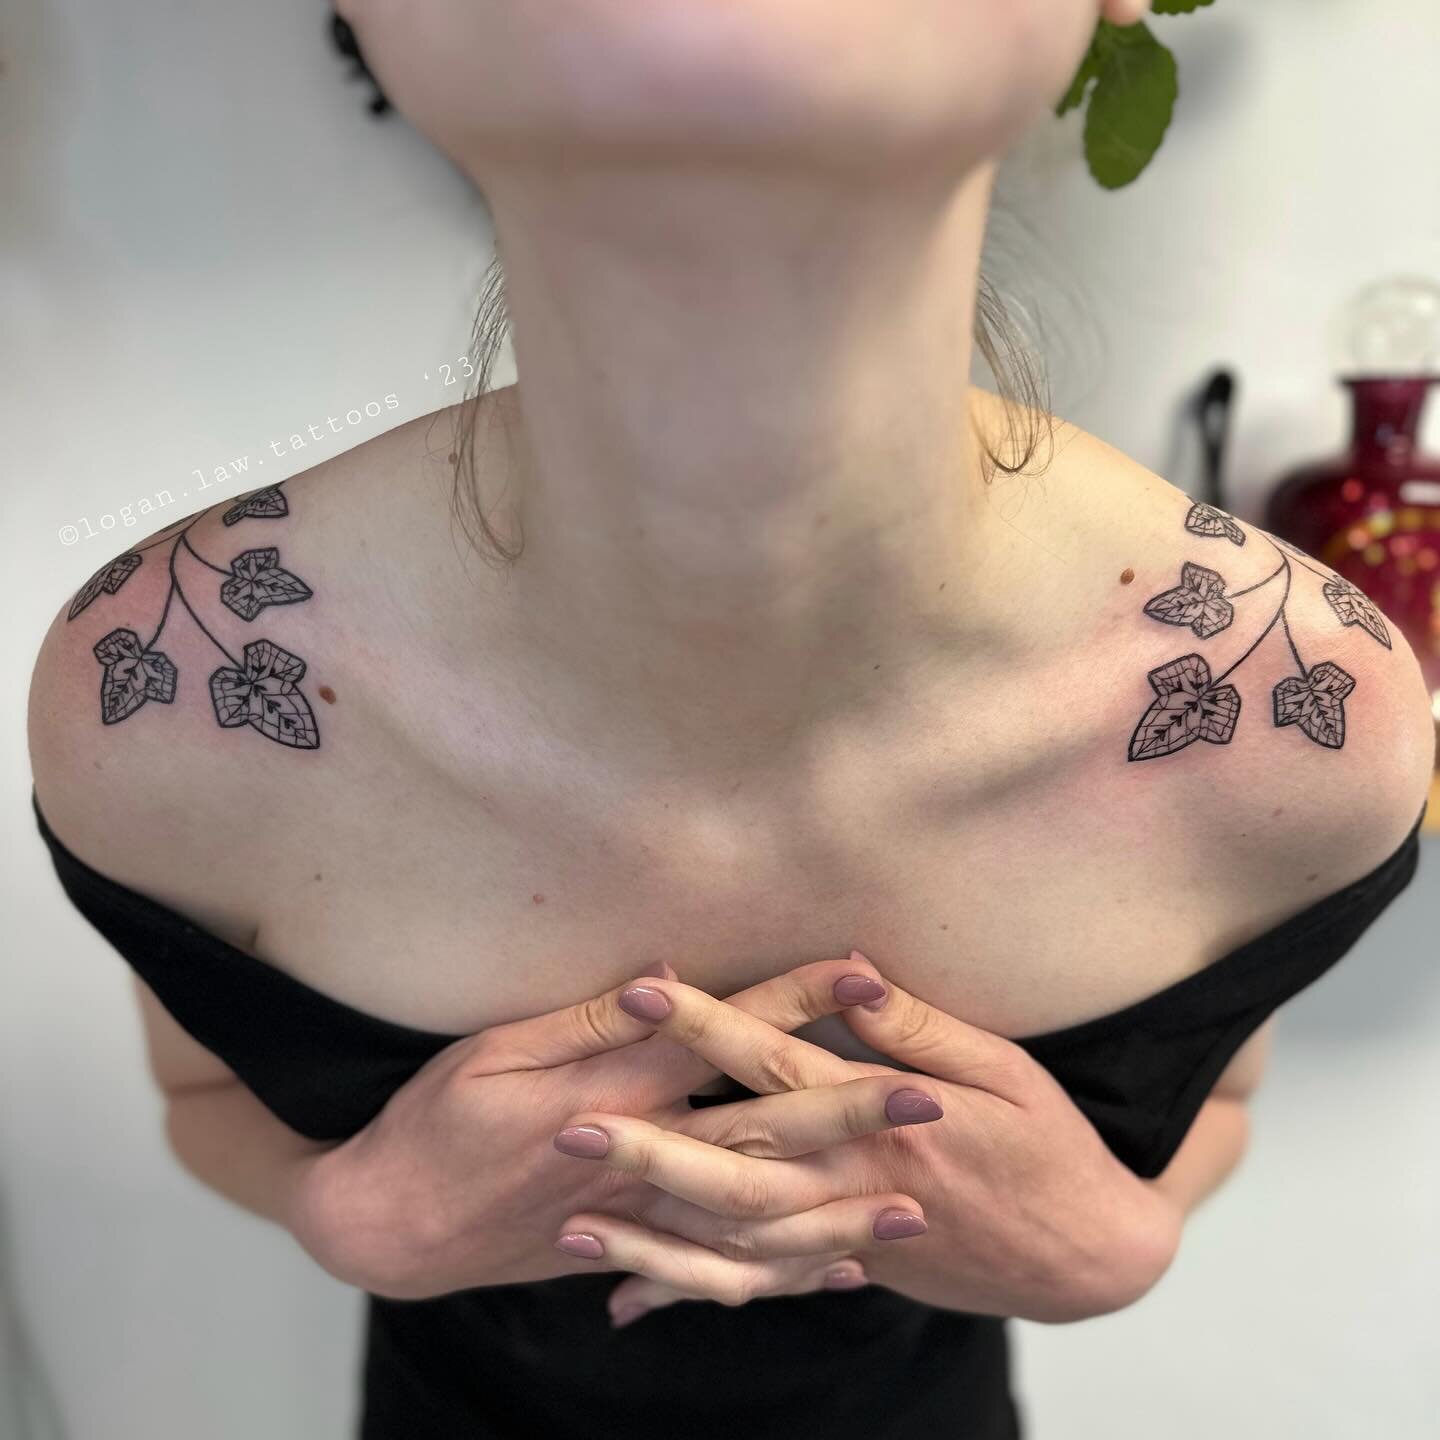 Shoulder ivy adornments extending from Veronica&rsquo;s back piece we did at the beginning of the year 𓇚 thanks for the fun project! Done at @perennialtattoostudio ✶ made with @kurosumitattooink and @goodjudy.ca supplies
&bull;
&bull;
&bull;
#ecotat